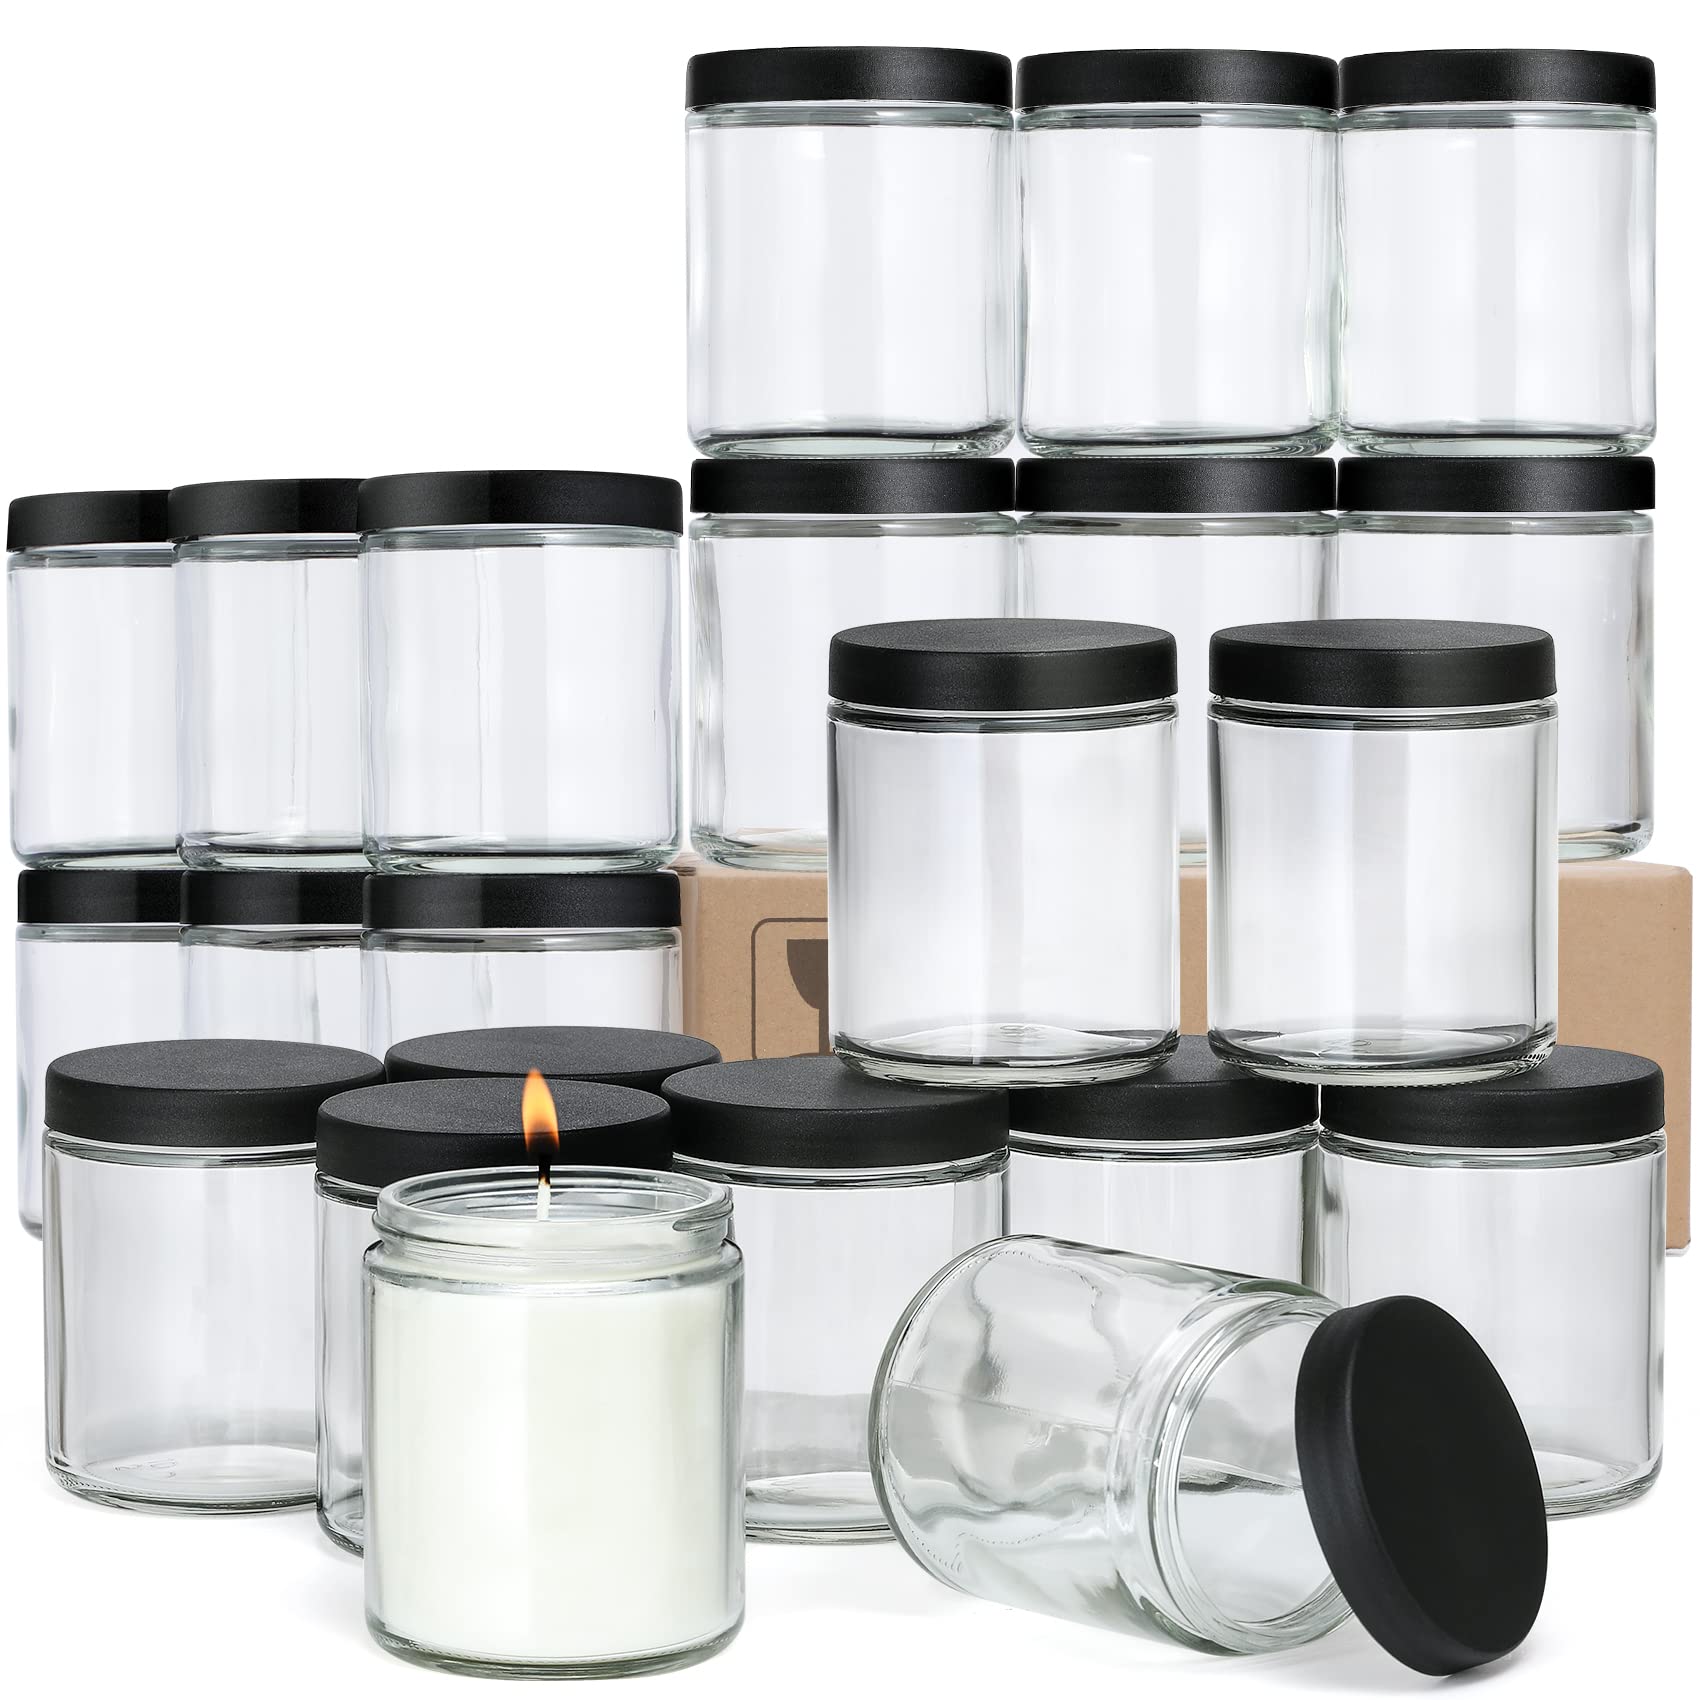 24 Pack, 8 OZ Thick Glass Jars with Lids, Clear Round Candle Making Jars - Empty Food Storage Containers, Mason Canning Jar For Spice, Powder, Liqu...